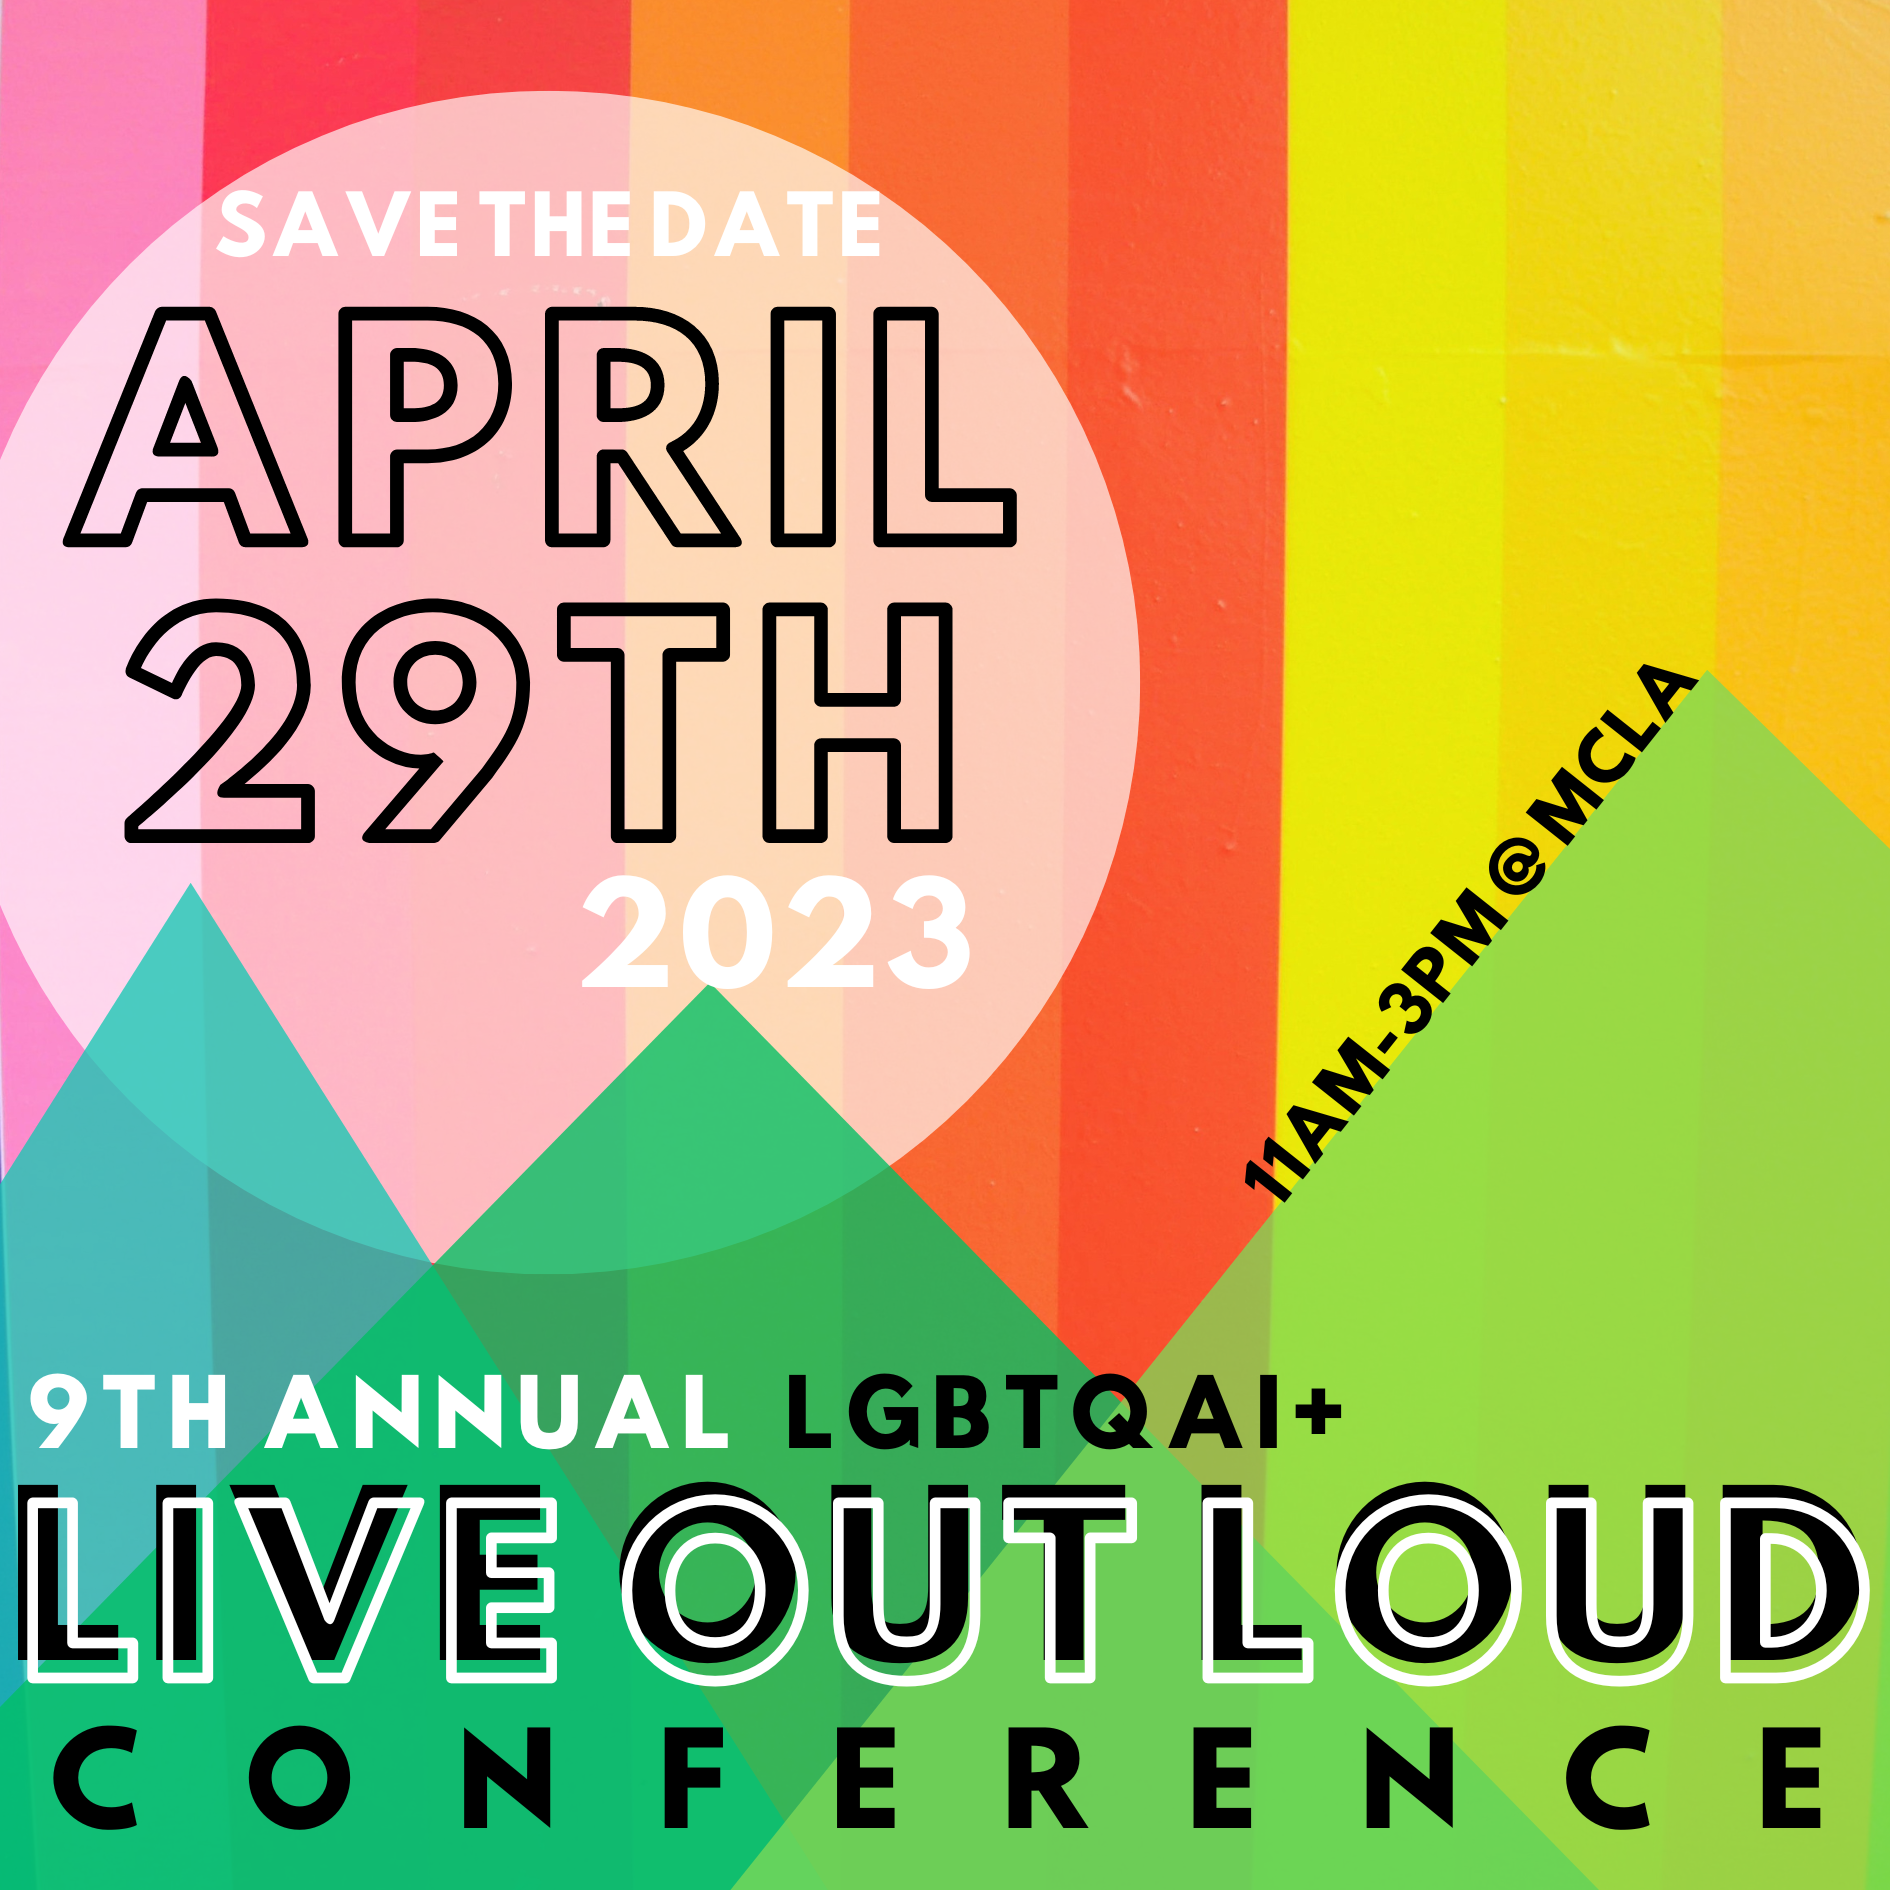 Our next conference is April 29, 2023 at MCLA from 11am-3pm. It will be out 9th annual LGBTQAI+ Live Out Loud Conference.
